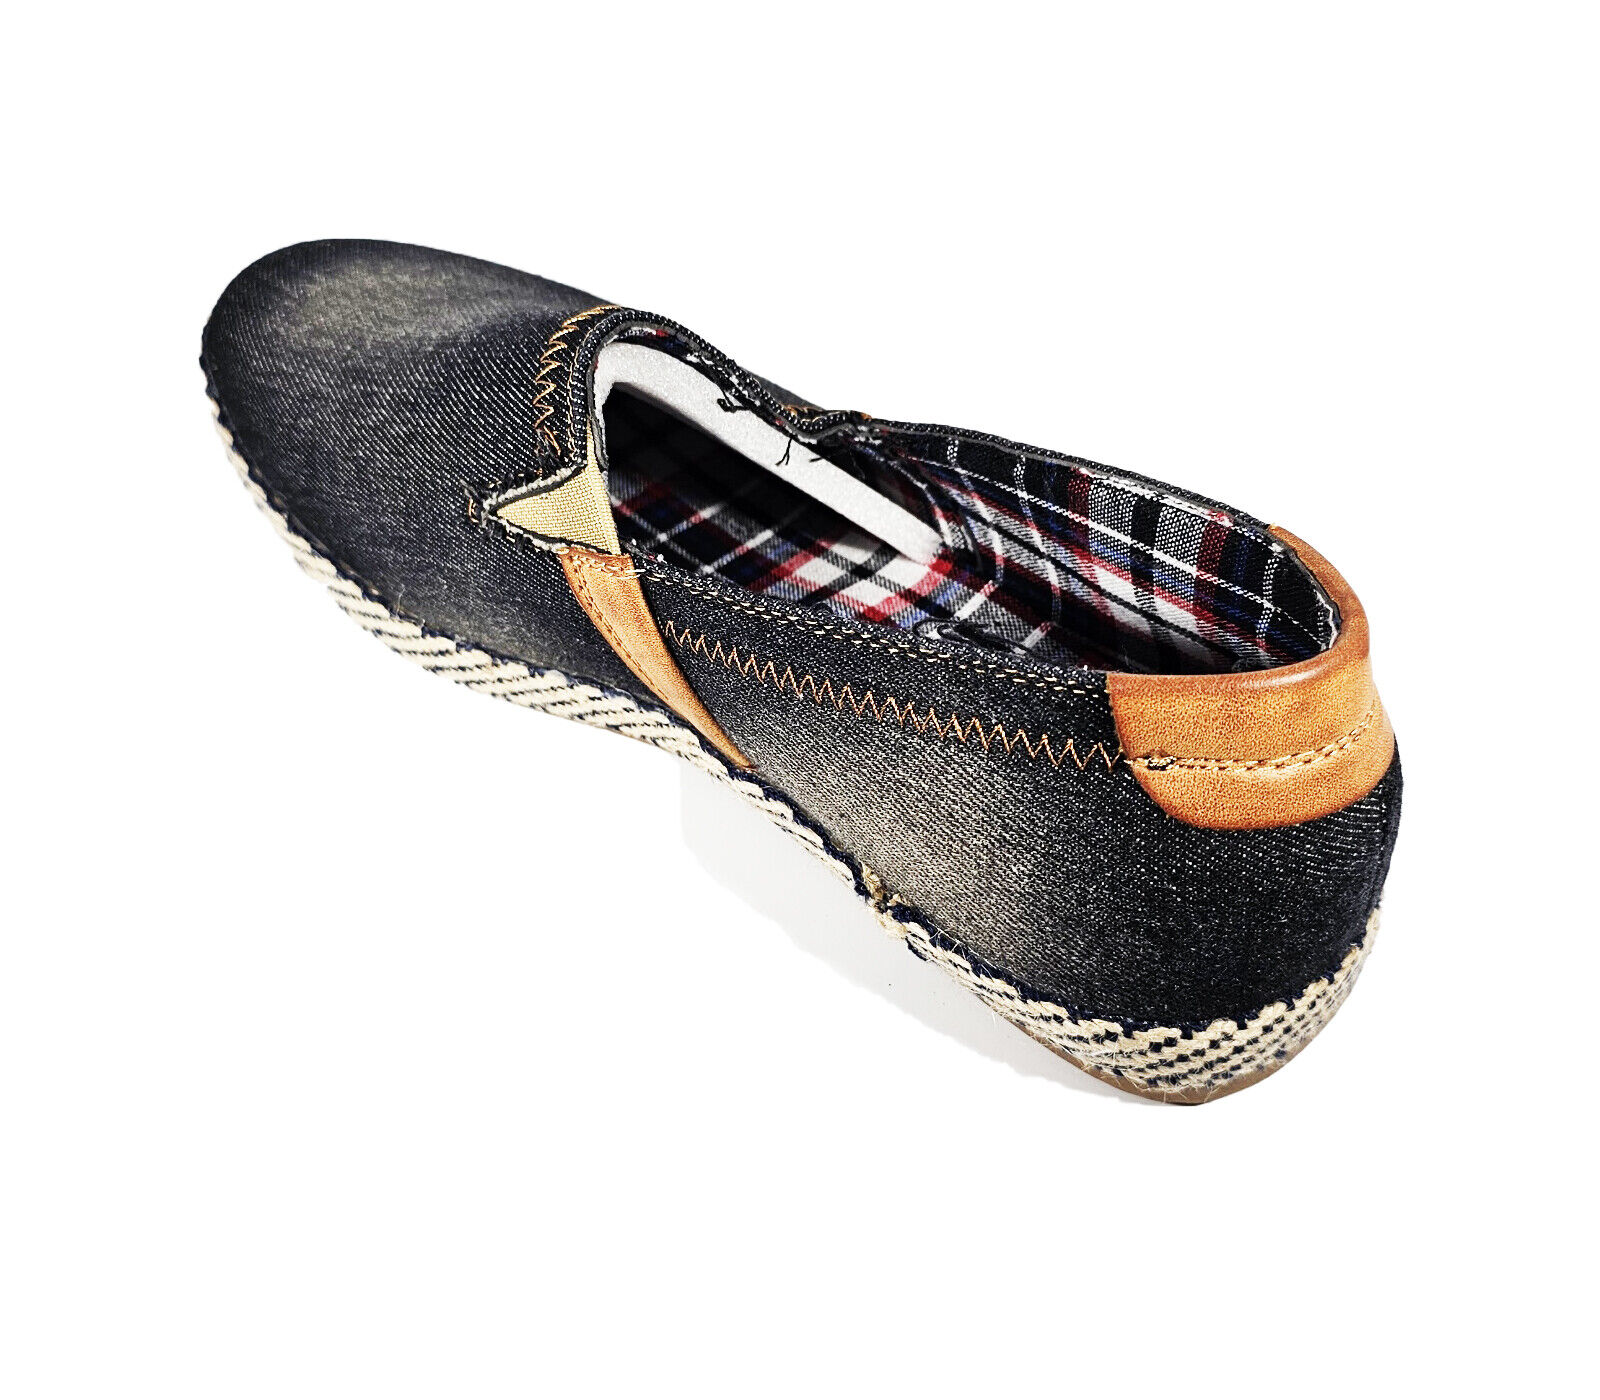 MENS WIDE FIT SLIP ON WALKING SHOES DRIVING LOAFERS MOCCASIN COMFORT ...